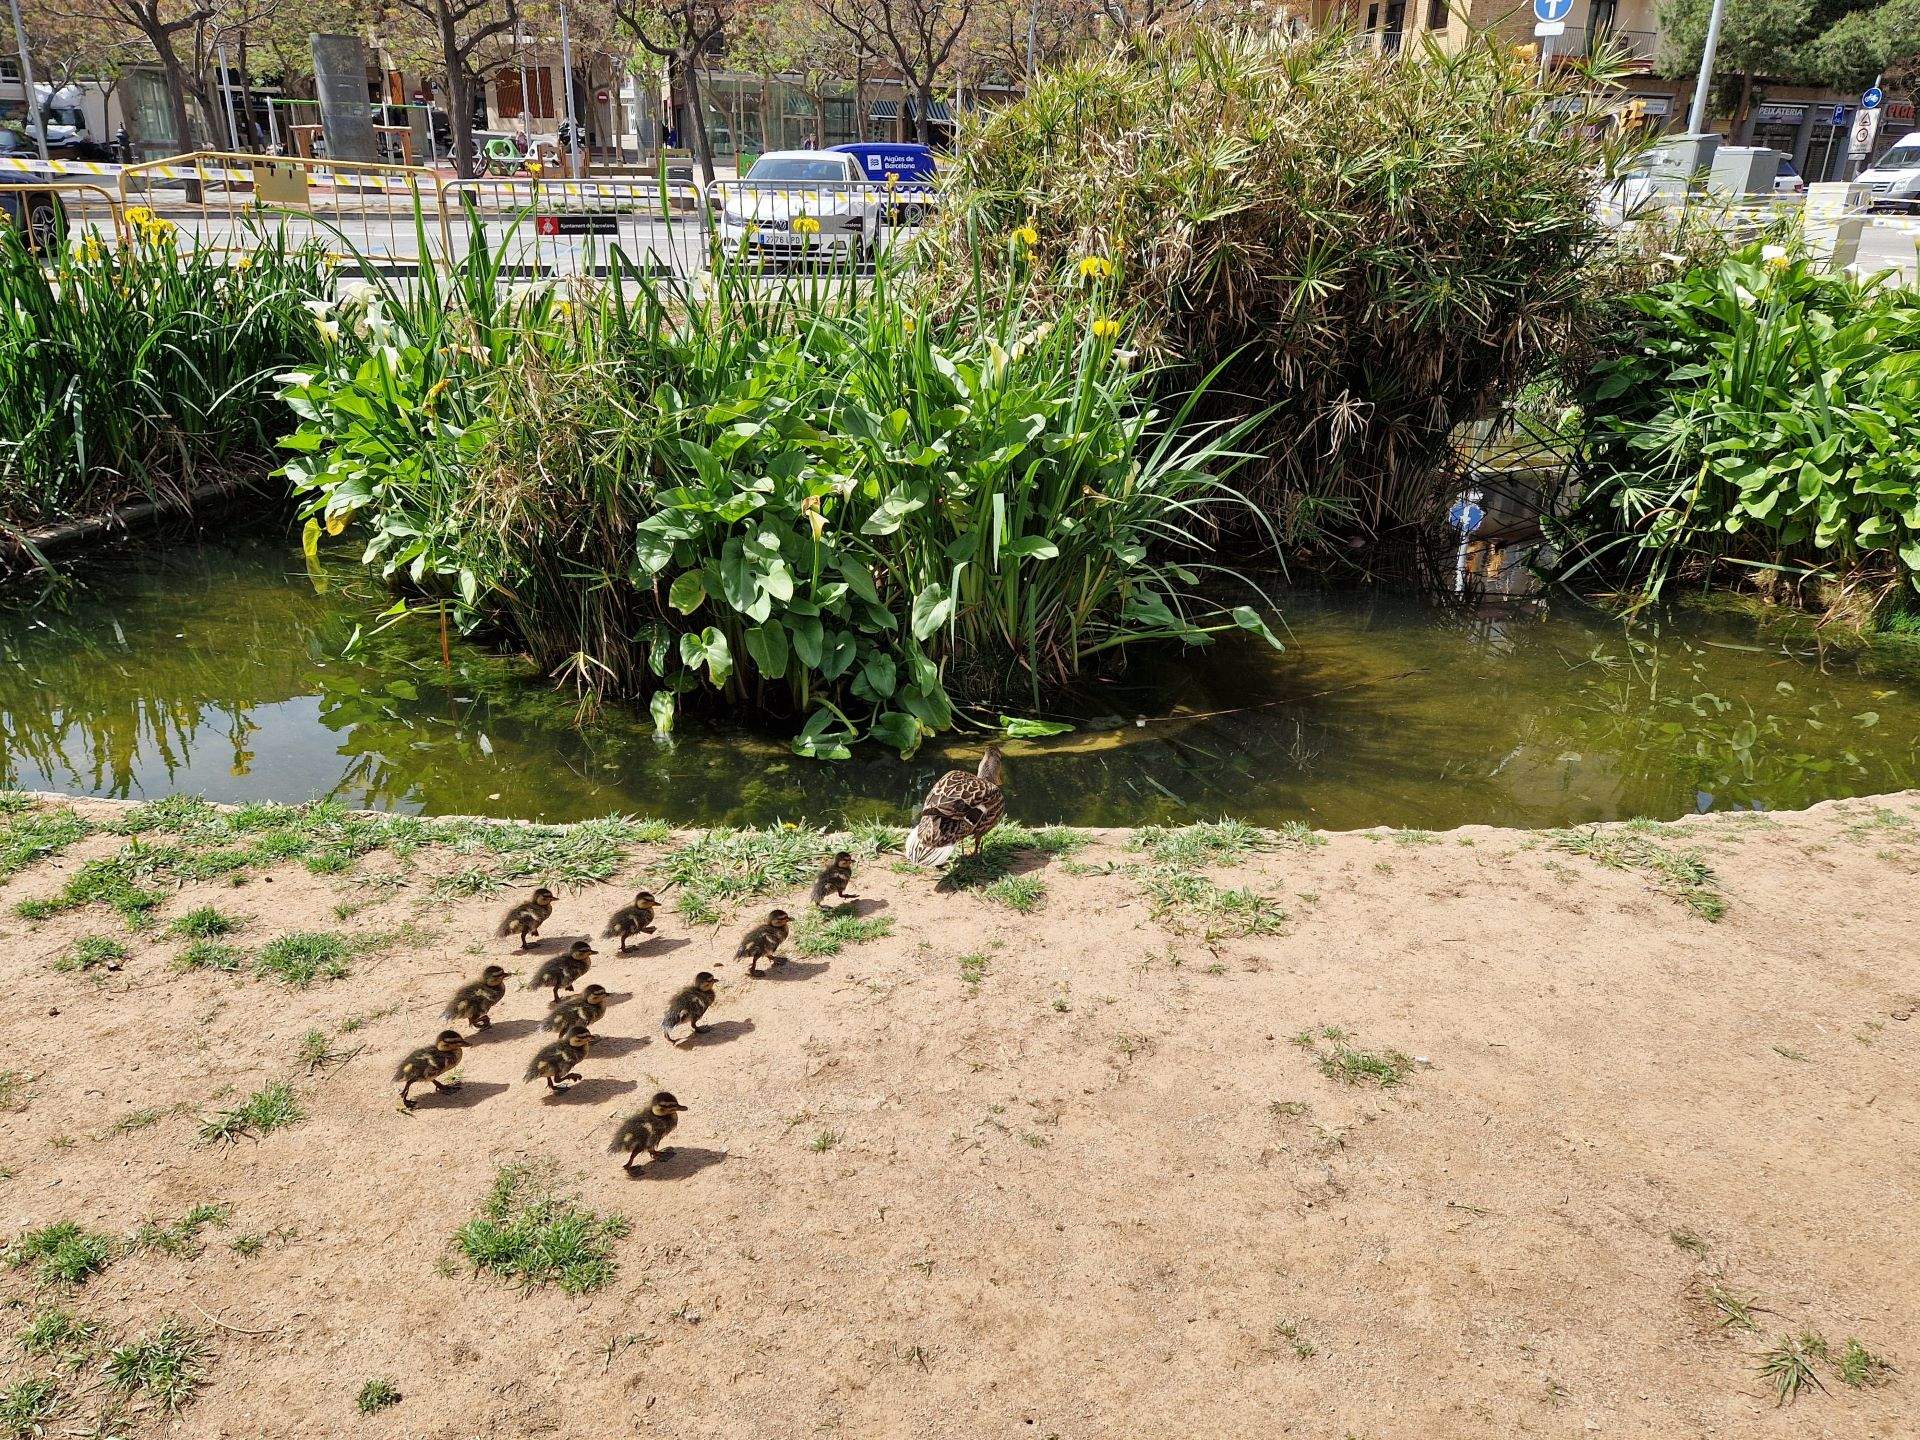 Eleven ducklings hatch in a tiny pond in built-up Barcelona: residents ask council to protect them